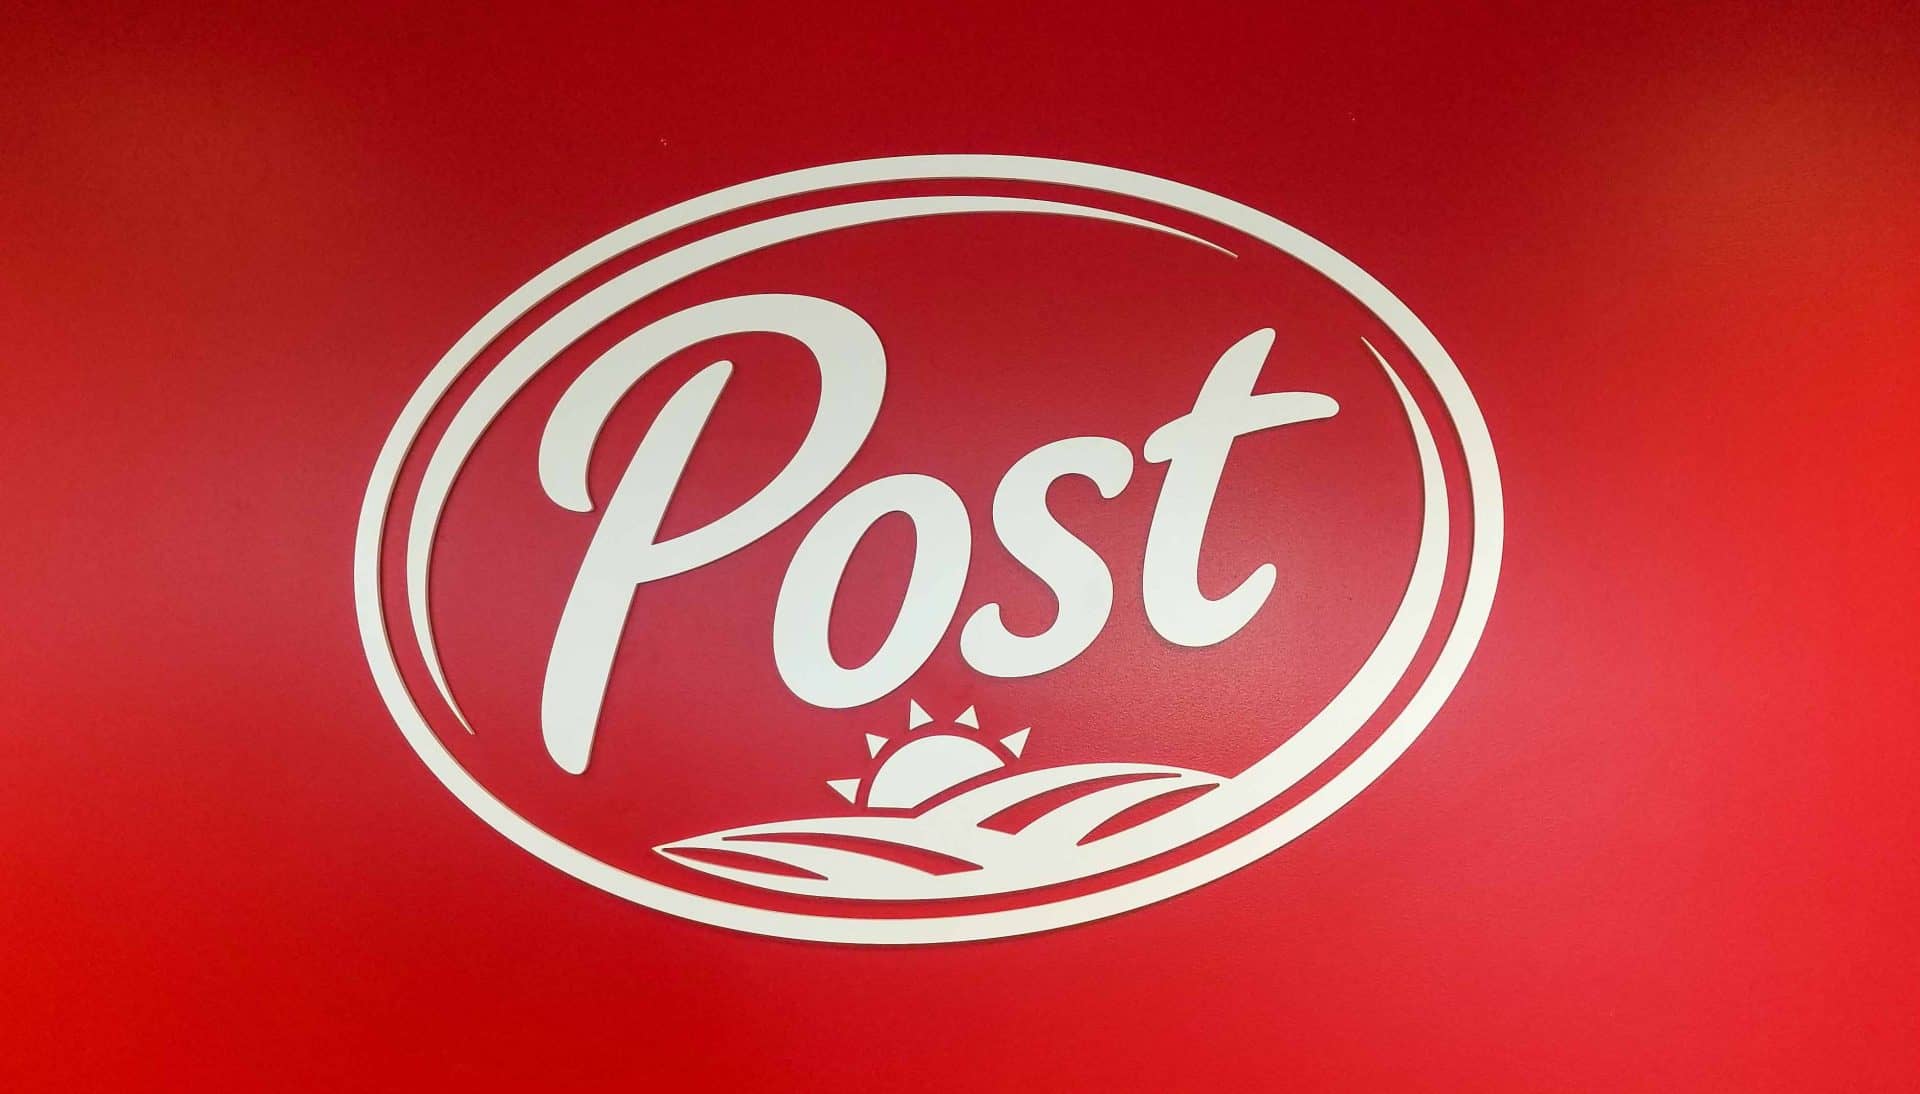 Post consumer Brands dimensional logo wall on red wall